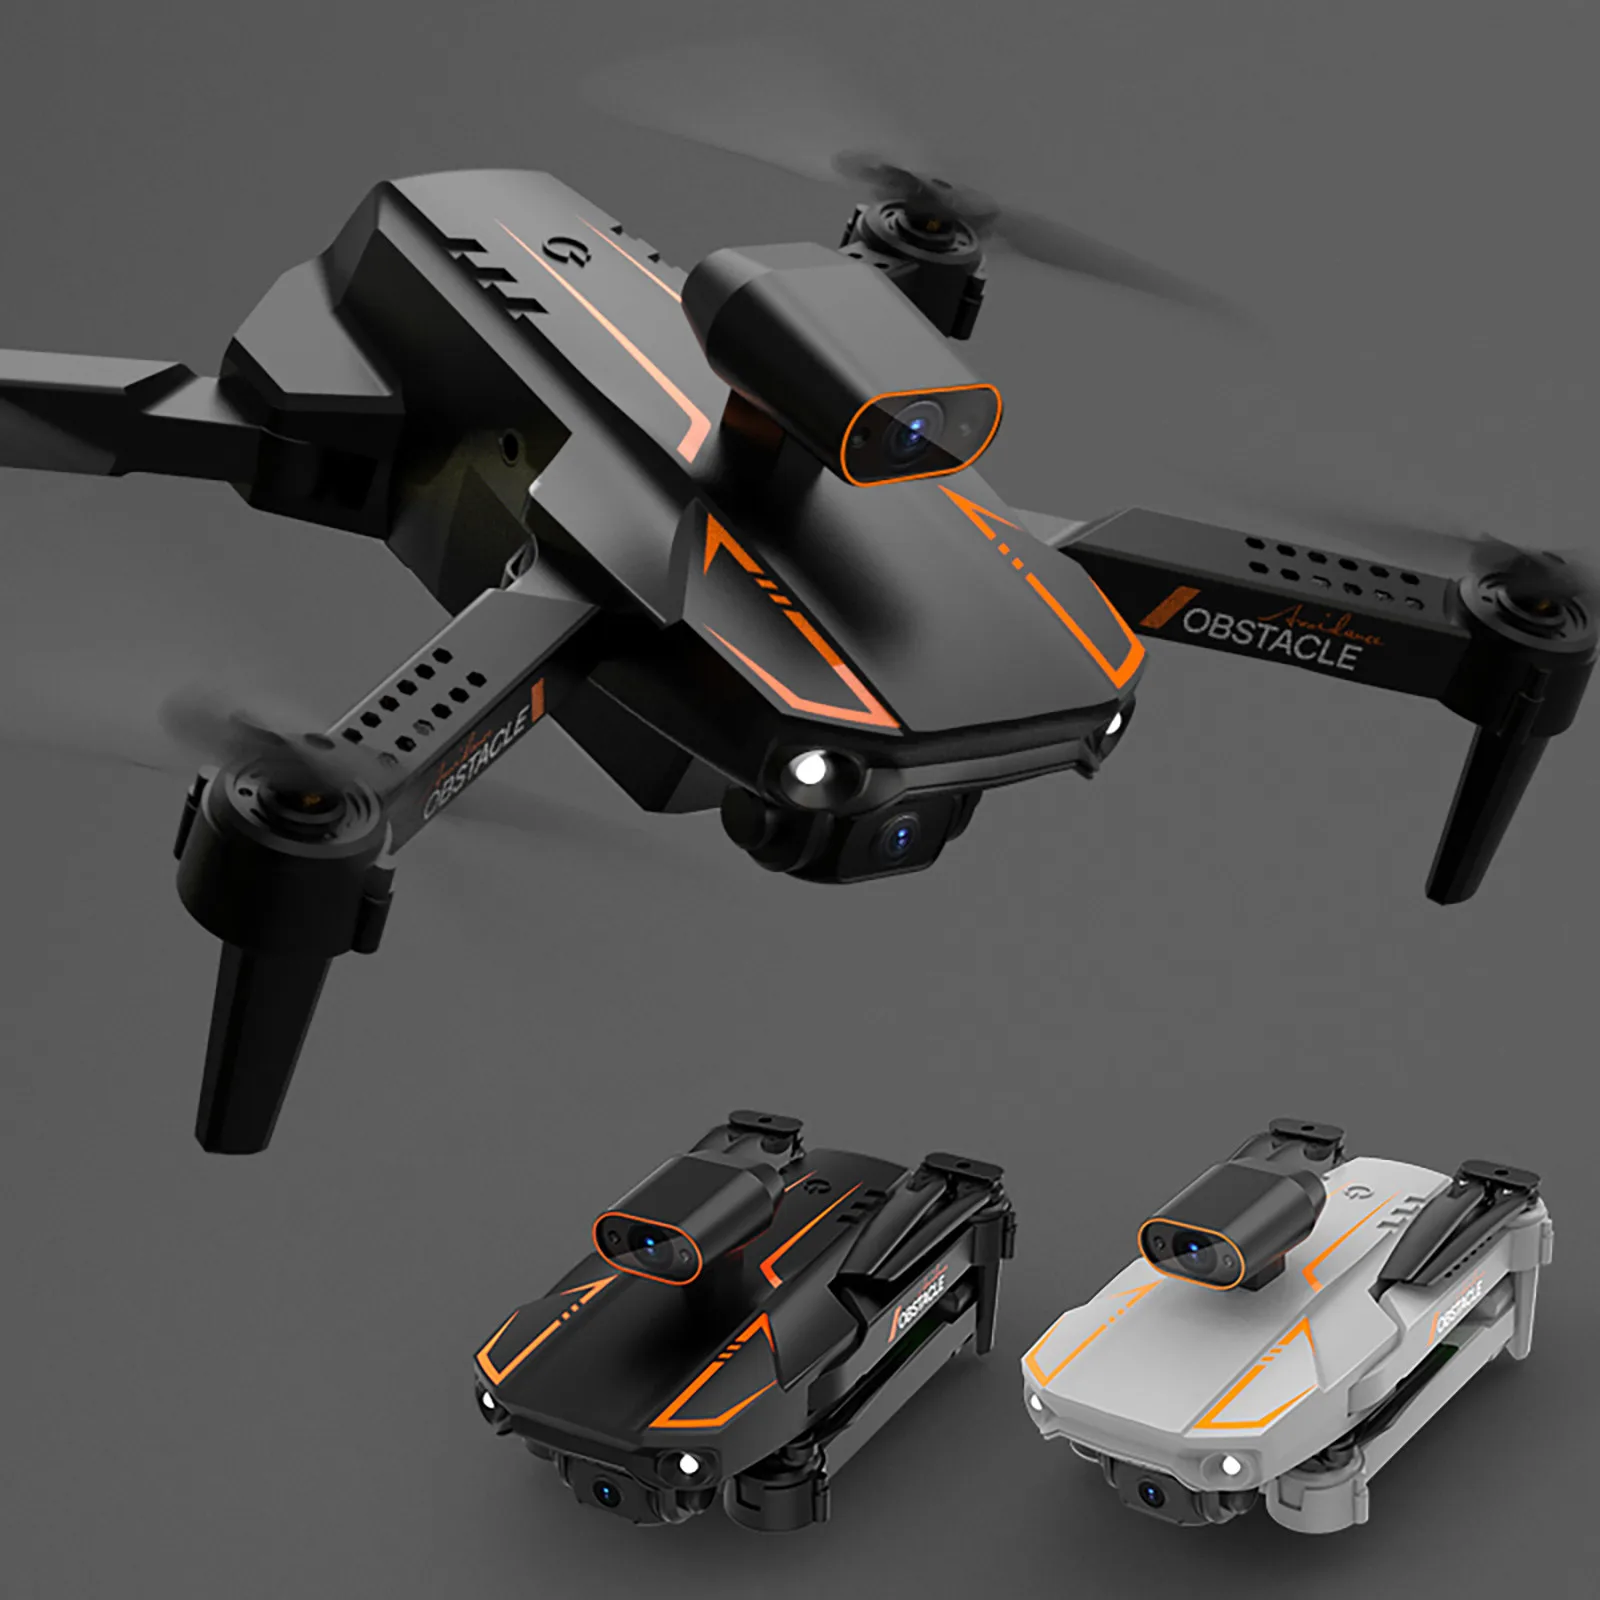 Utoghter S91 Folding Real-time Aerial Photography Four-axis Toy Gift Fixed - £45.16 GBP